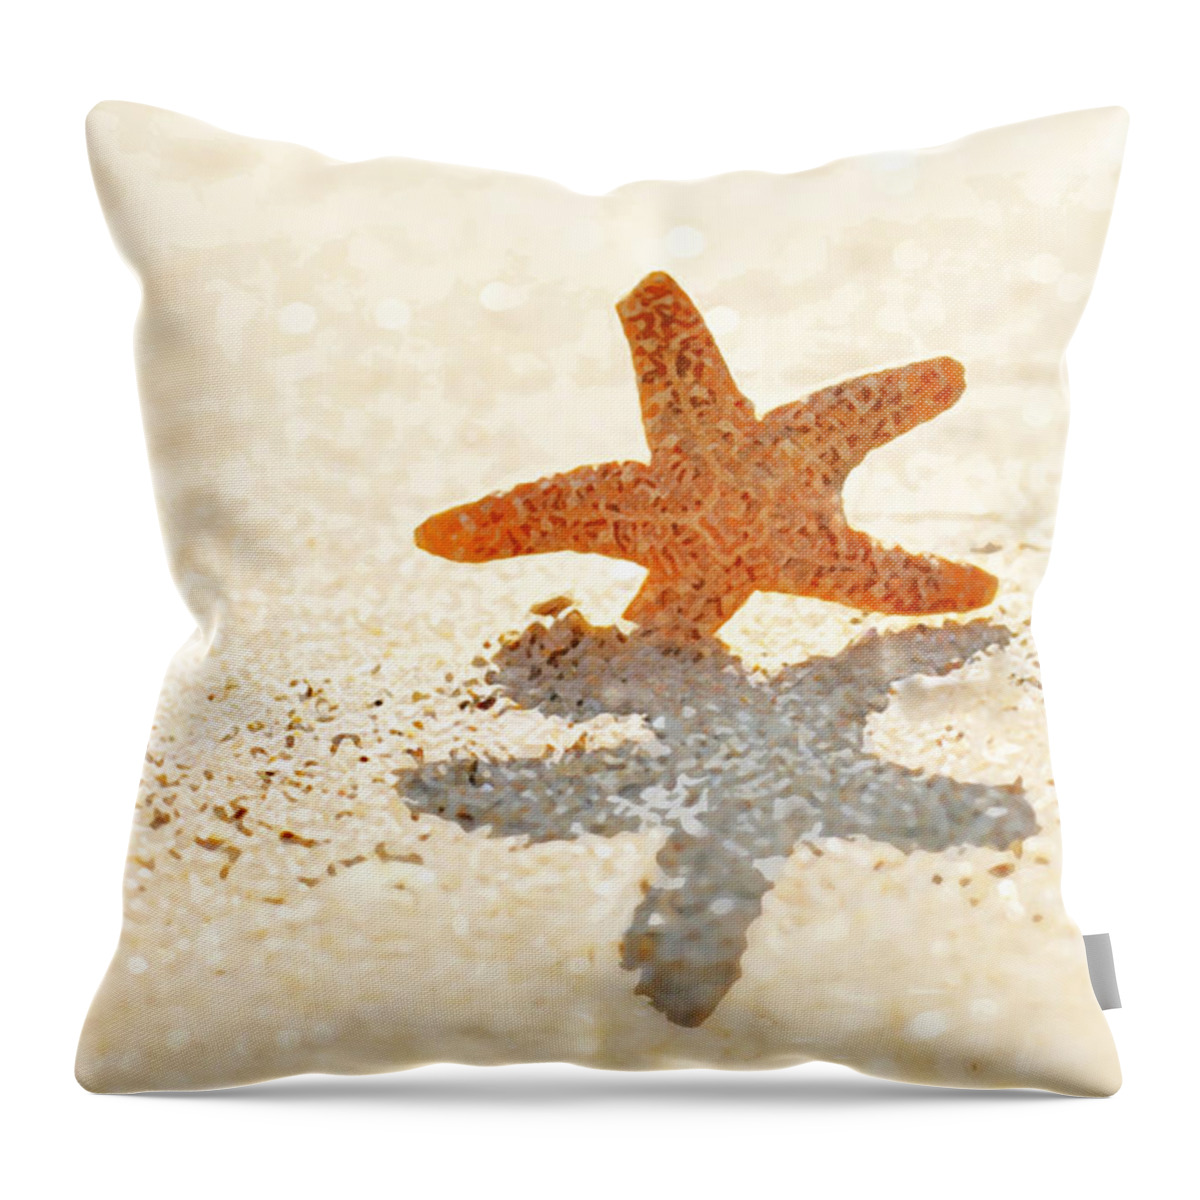 Starfish Throw Pillow featuring the photograph Starfish by Art Block Collections